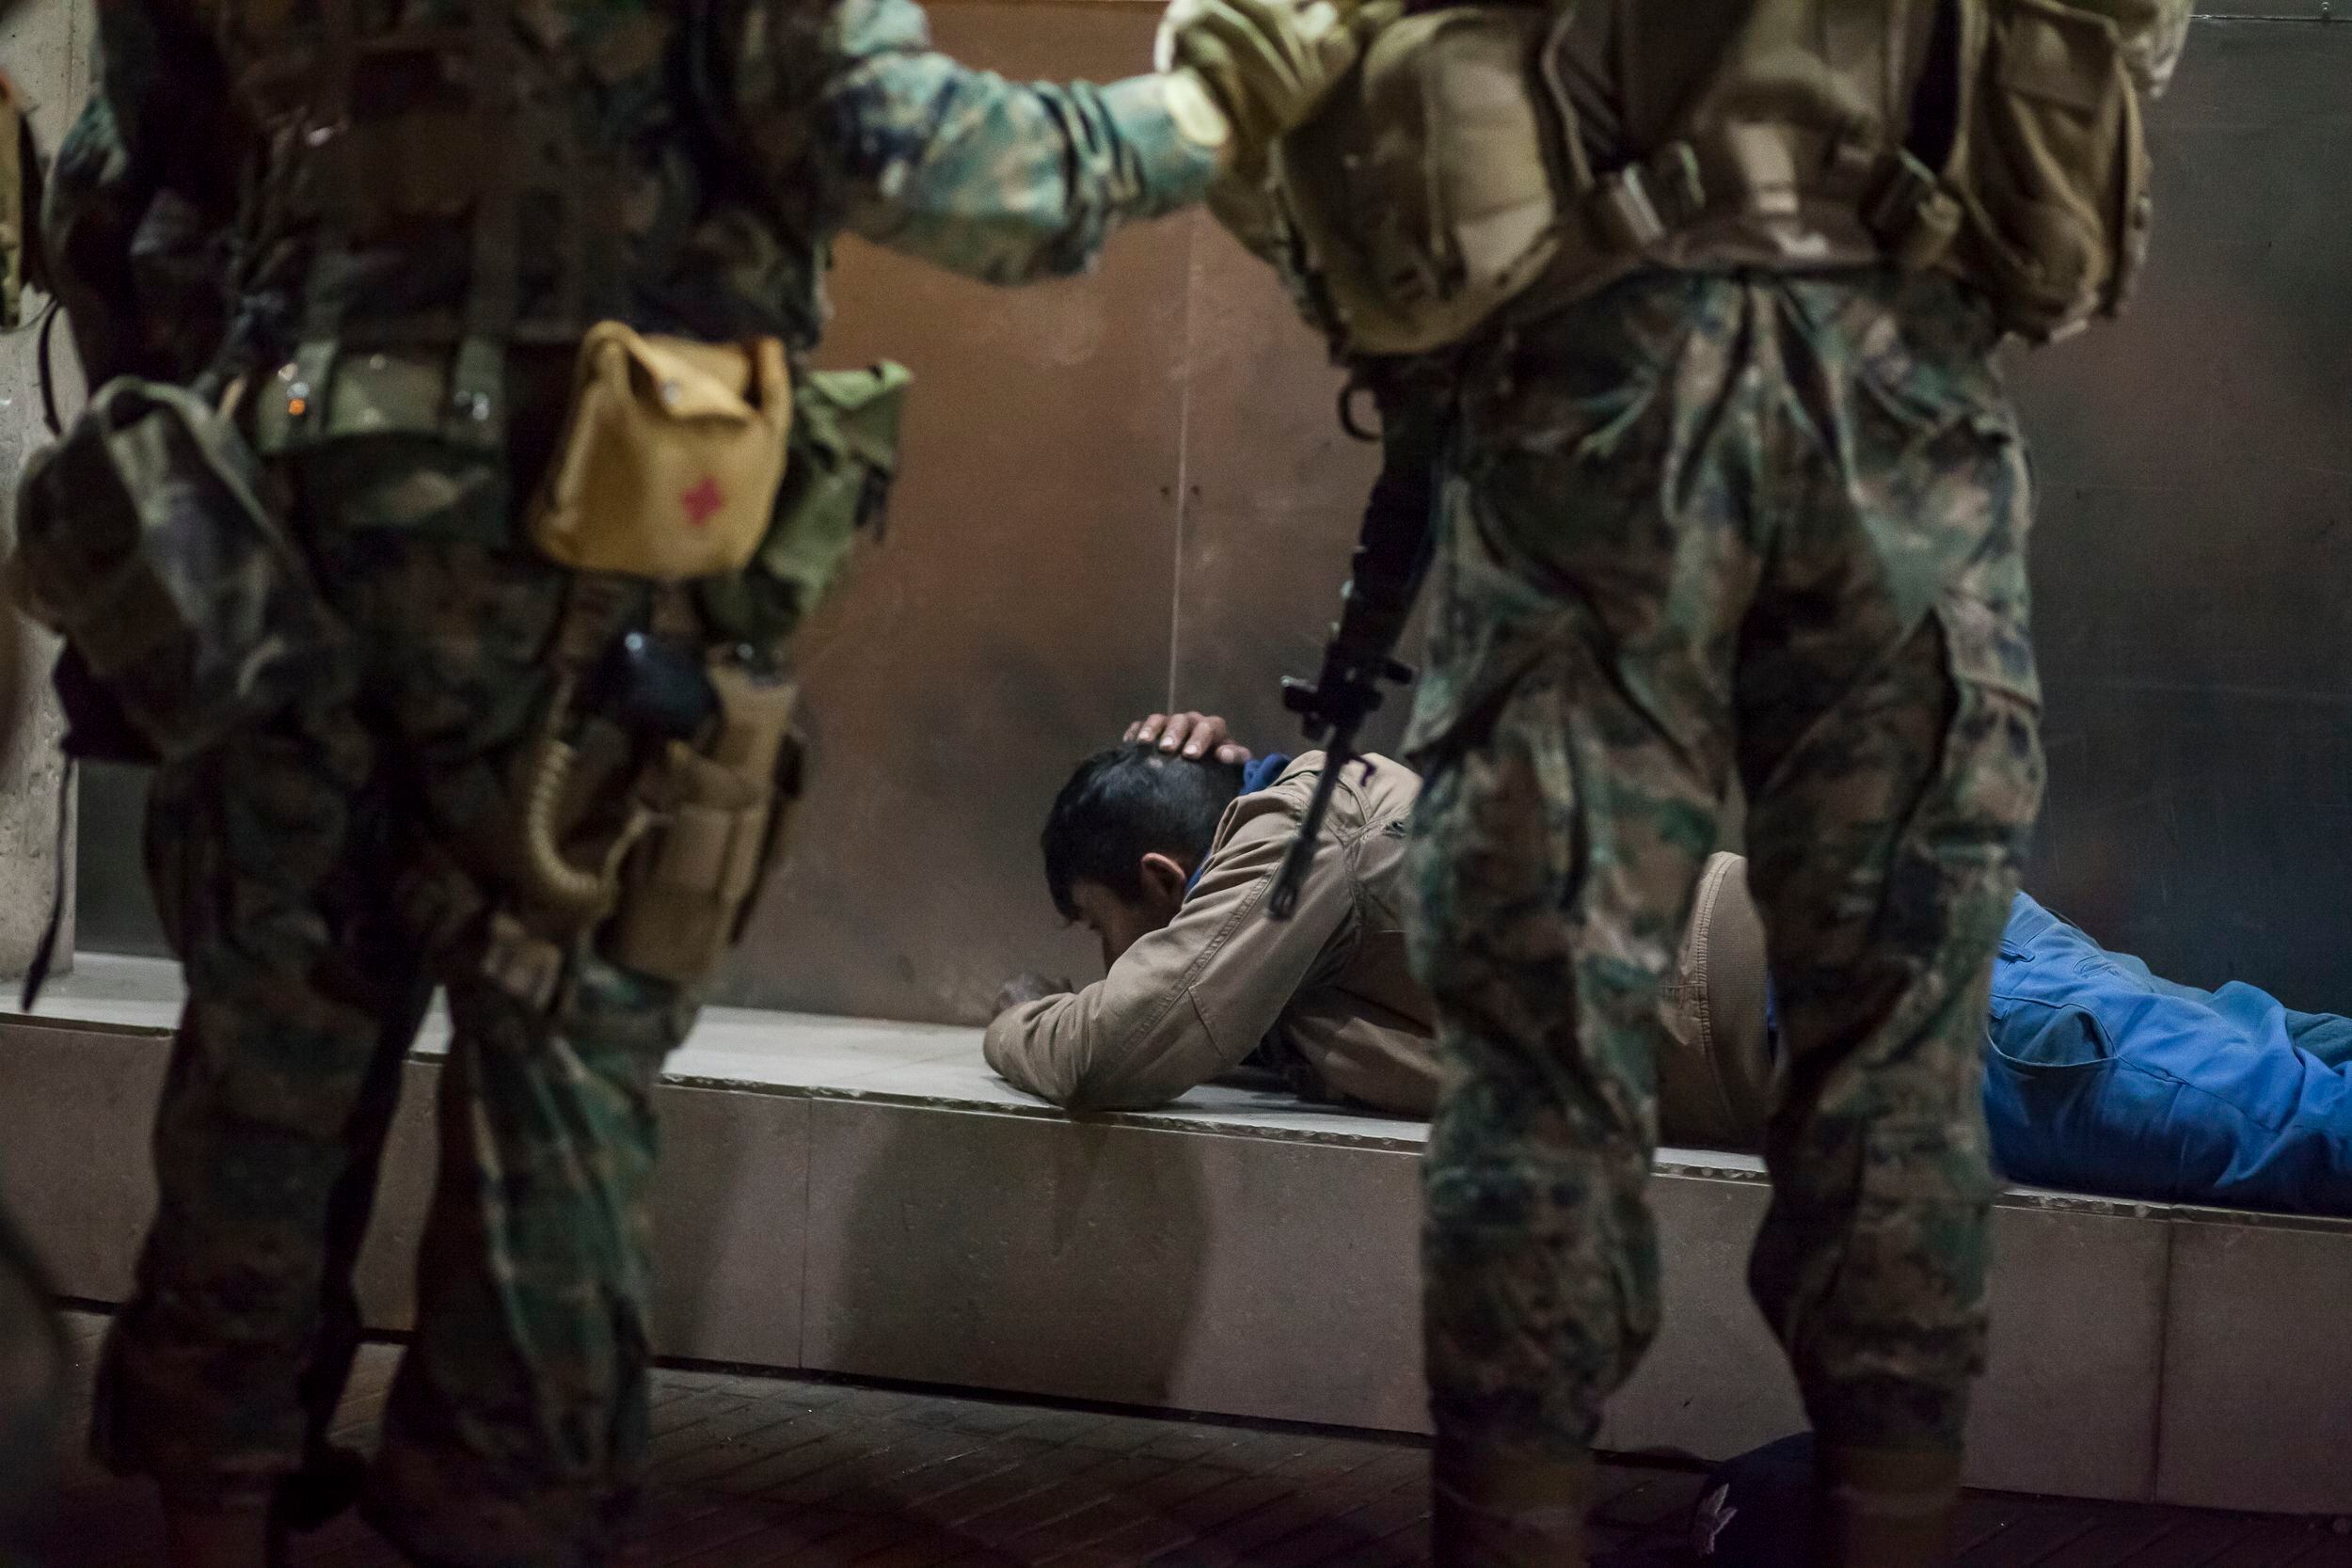 Chilean soldiers arrest a young man they found after the curfew, in Osorno, during the social unrest of 2019.